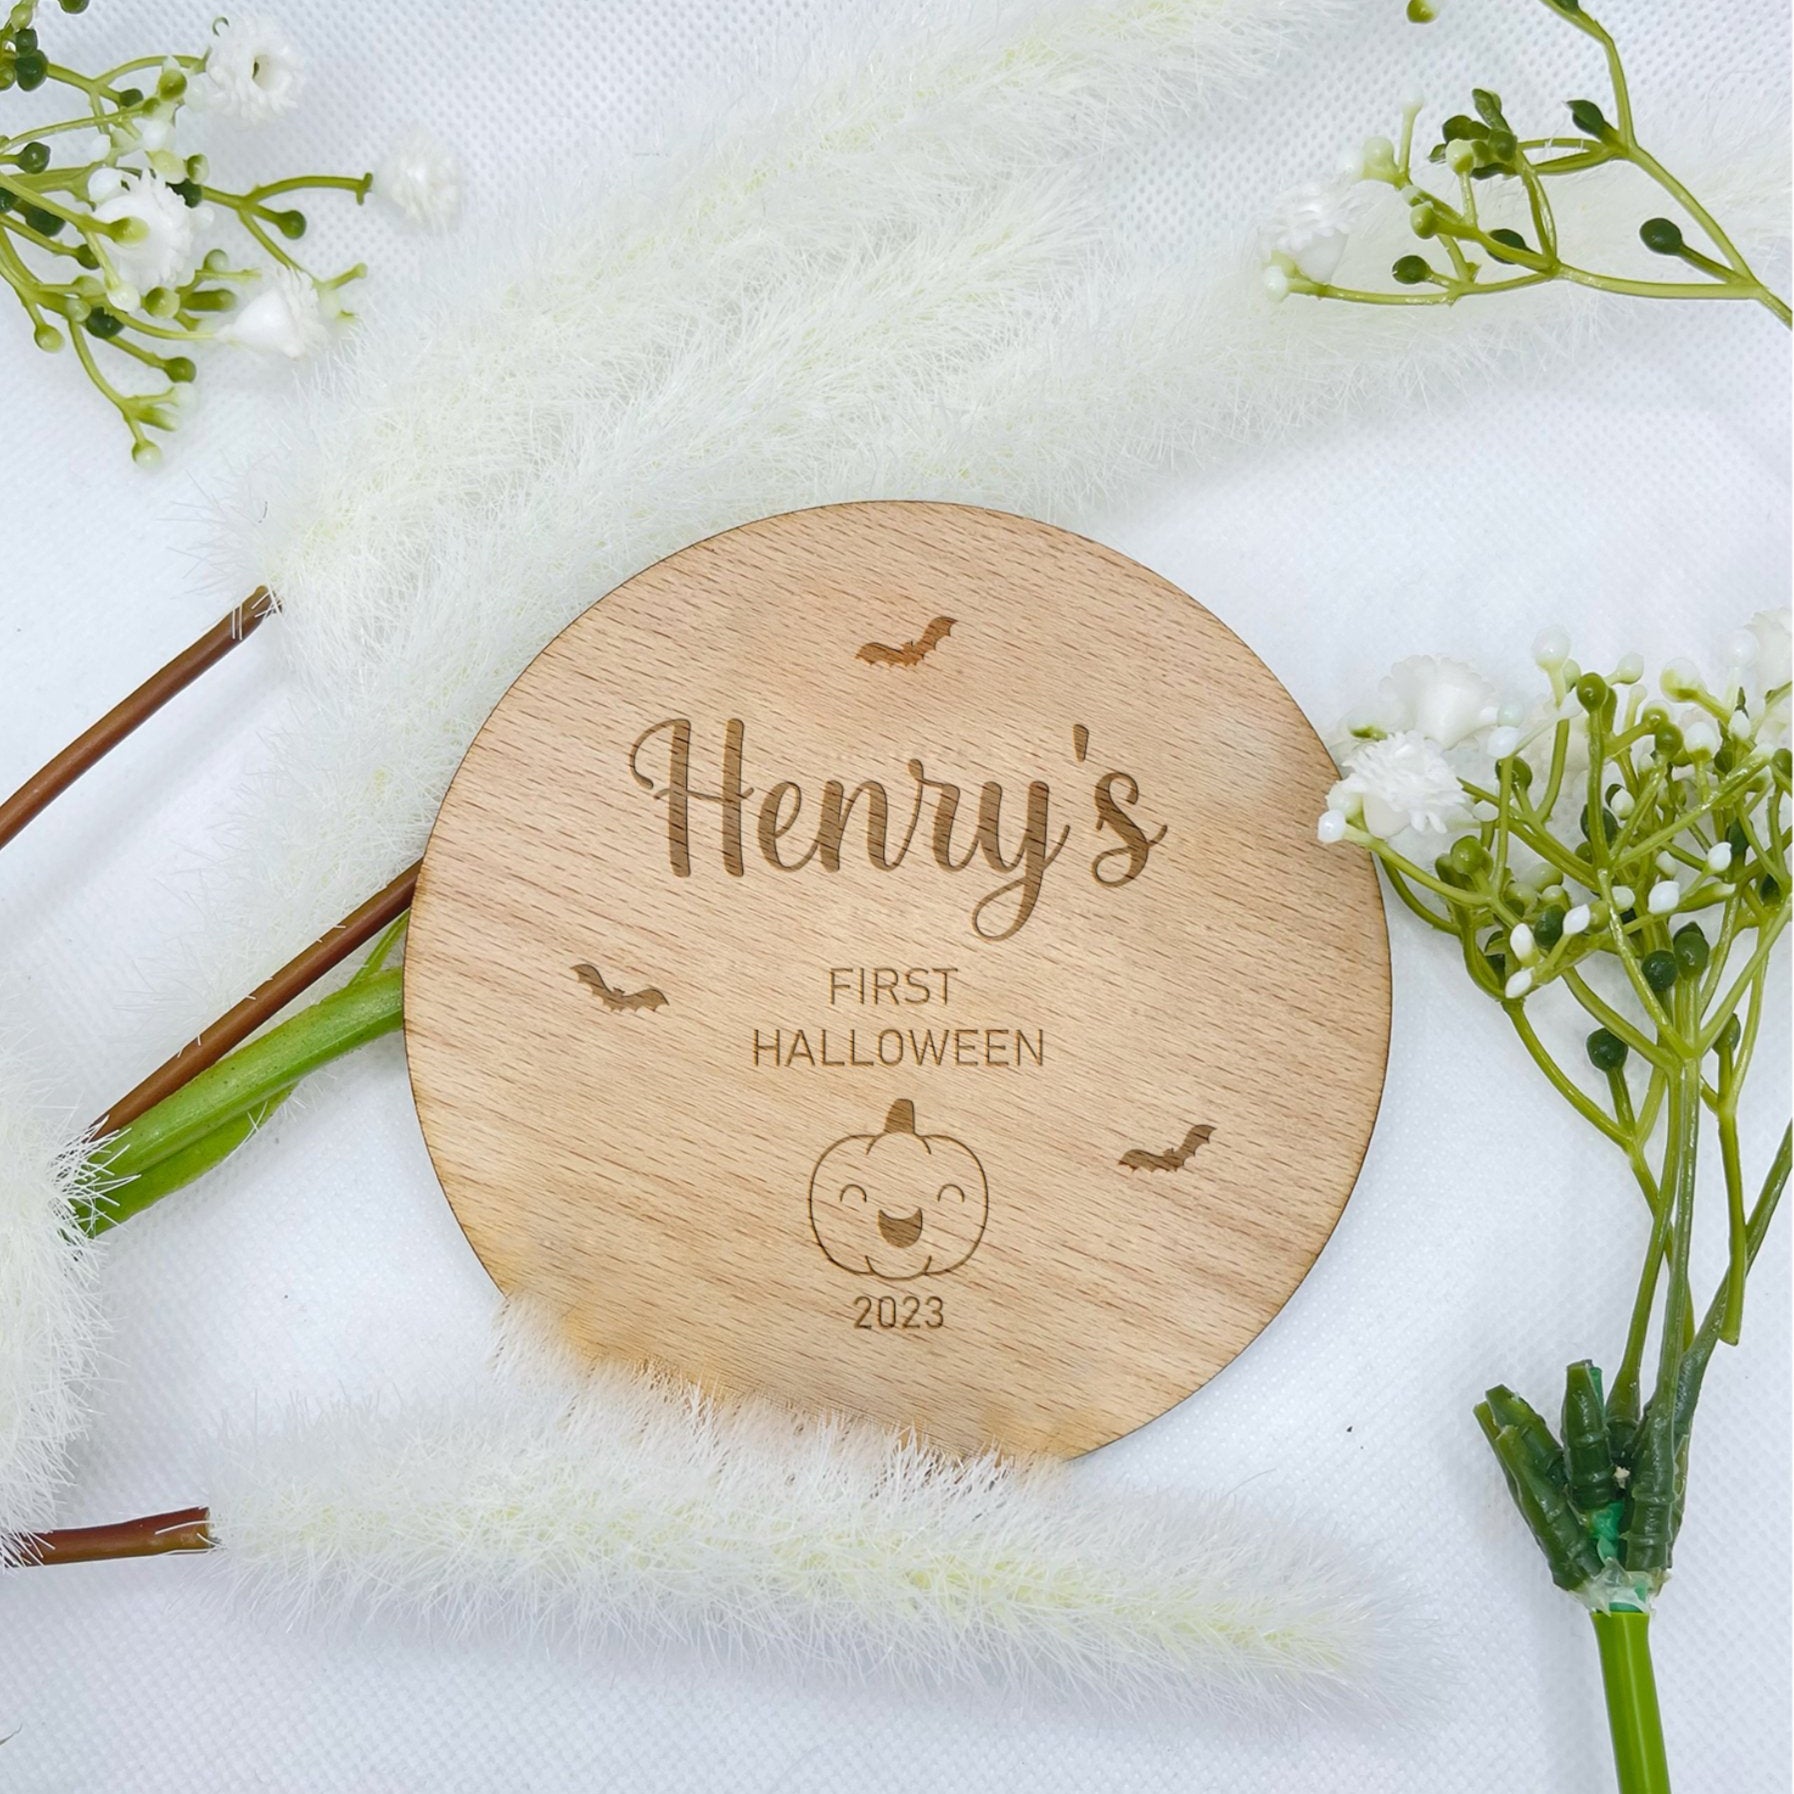 Personalised Baby's First Halloween Plaque - Engraved cherry wood plaque with cute pumpkin and bats design. Preserve precious memories of this milestone with a custom keepsake. Perfect Halloween decor/photo prop for your little one!